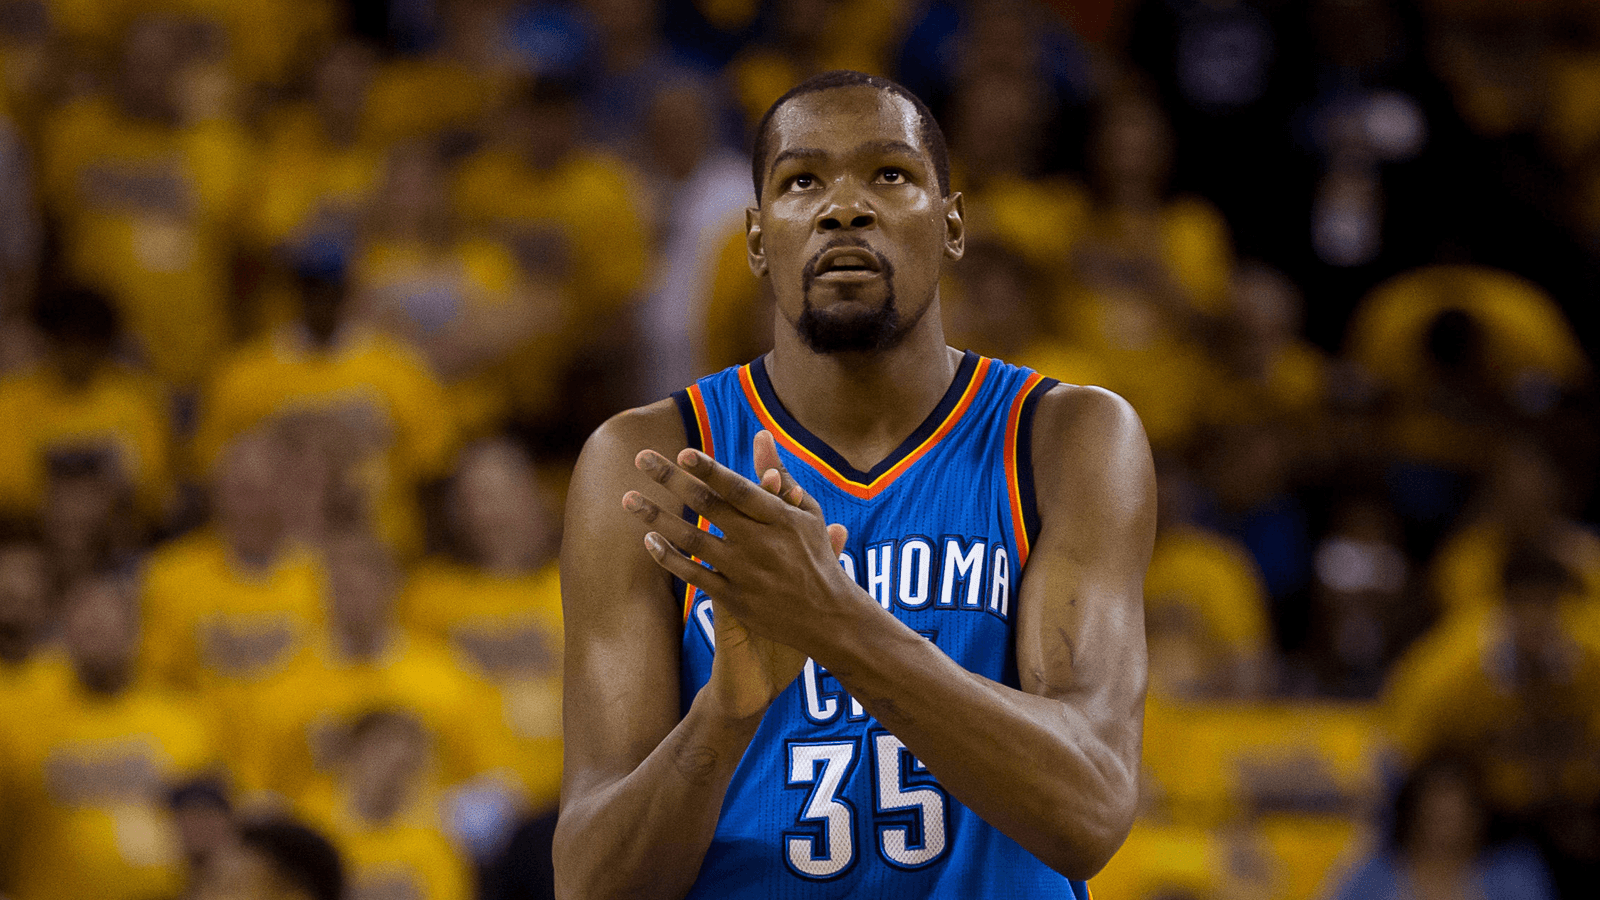 Want Kevin Durant on the Wizards? Root for Thunder over Warriors